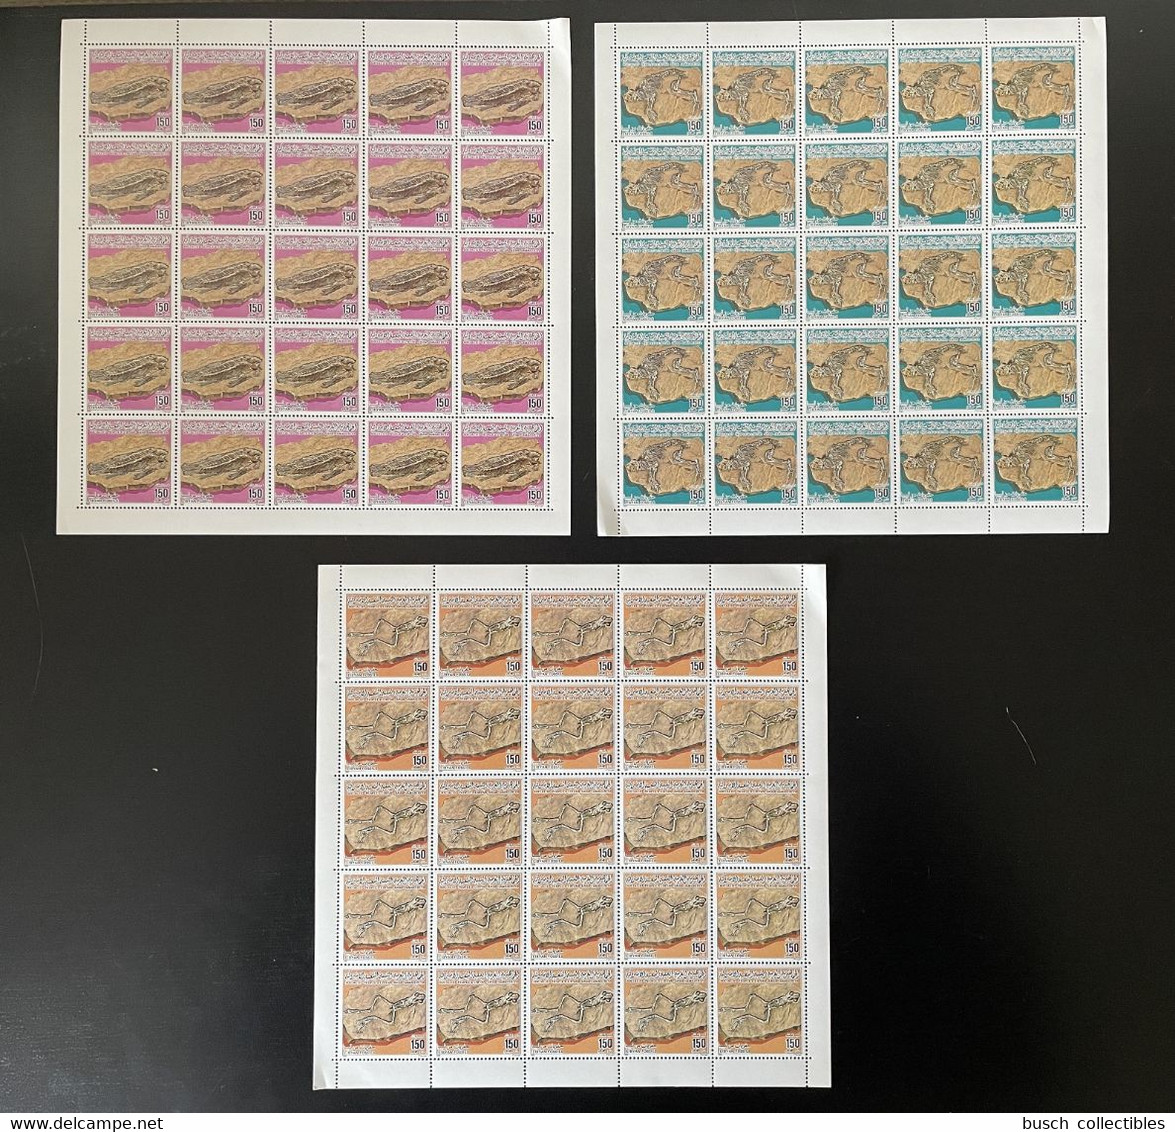 Libye Libya 1985 Mi. 1478 - 1480 Libyan Fossils Fossilien Fossiles Full Sheets Of 25 Stamps RARE SCARCE - Archeologie